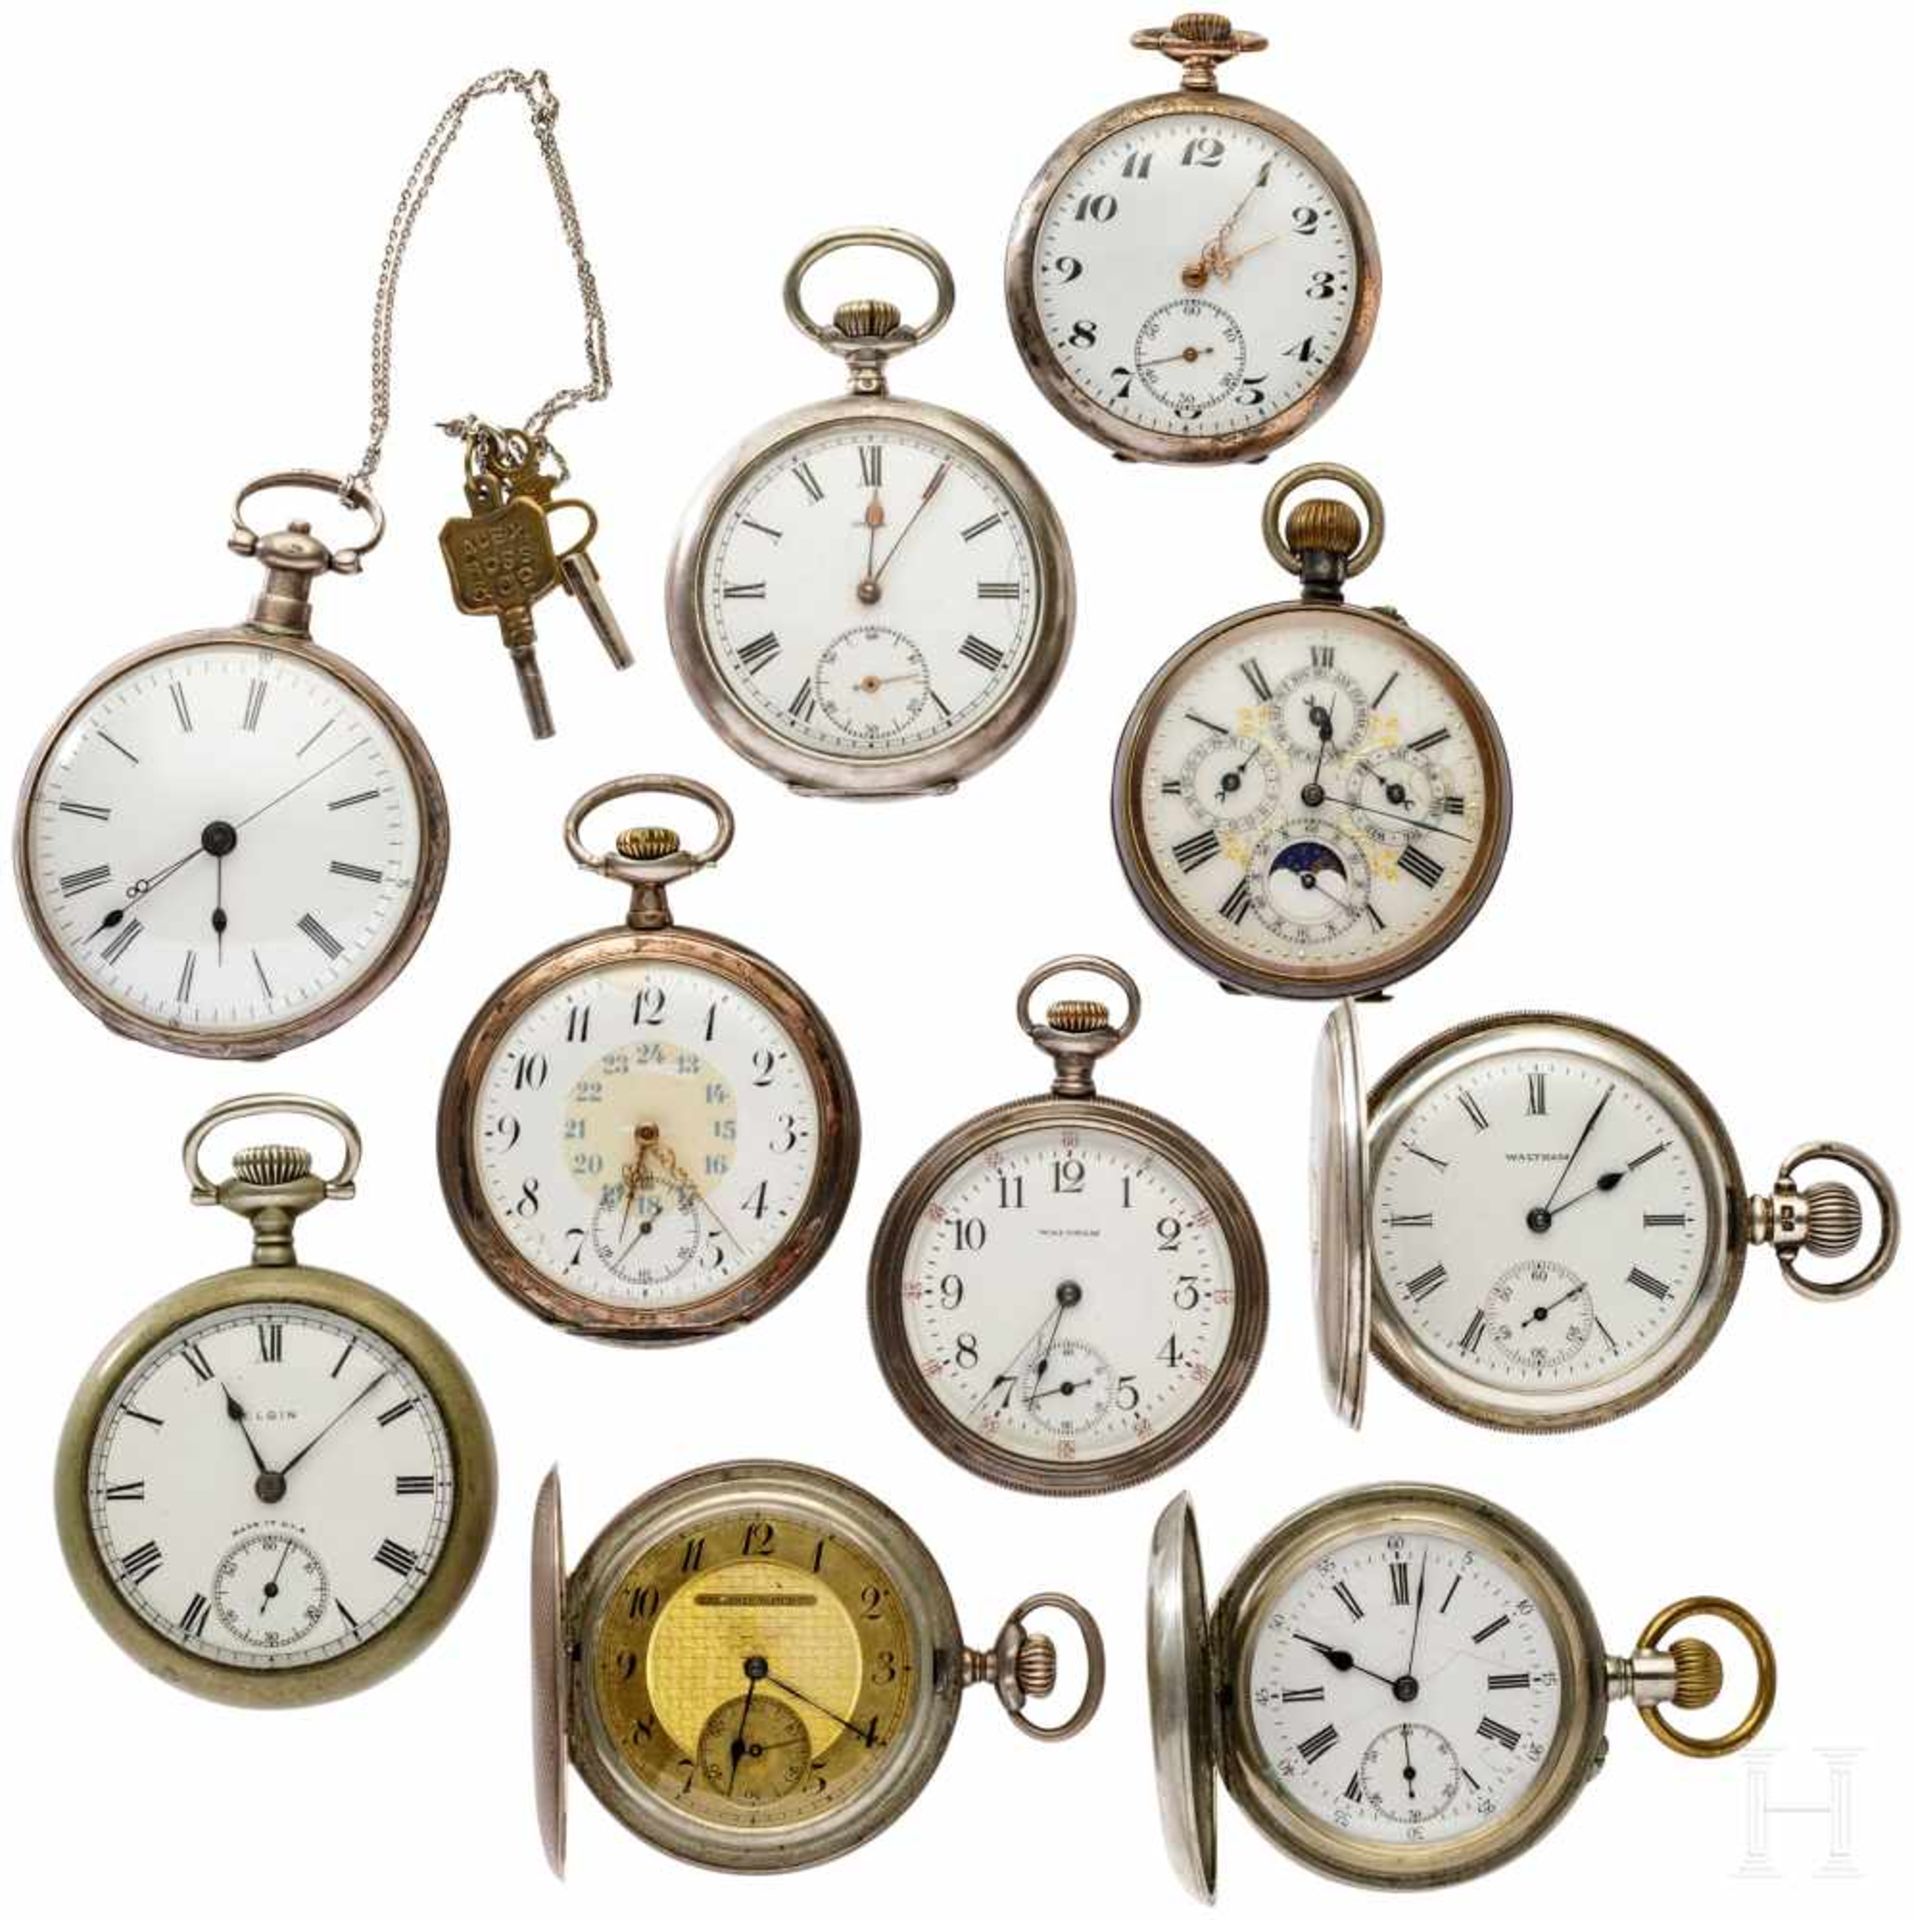 Ten pocket watchesVarious makers and models, winding by hand or with key. Diameters ca. 50 to 54 mm.